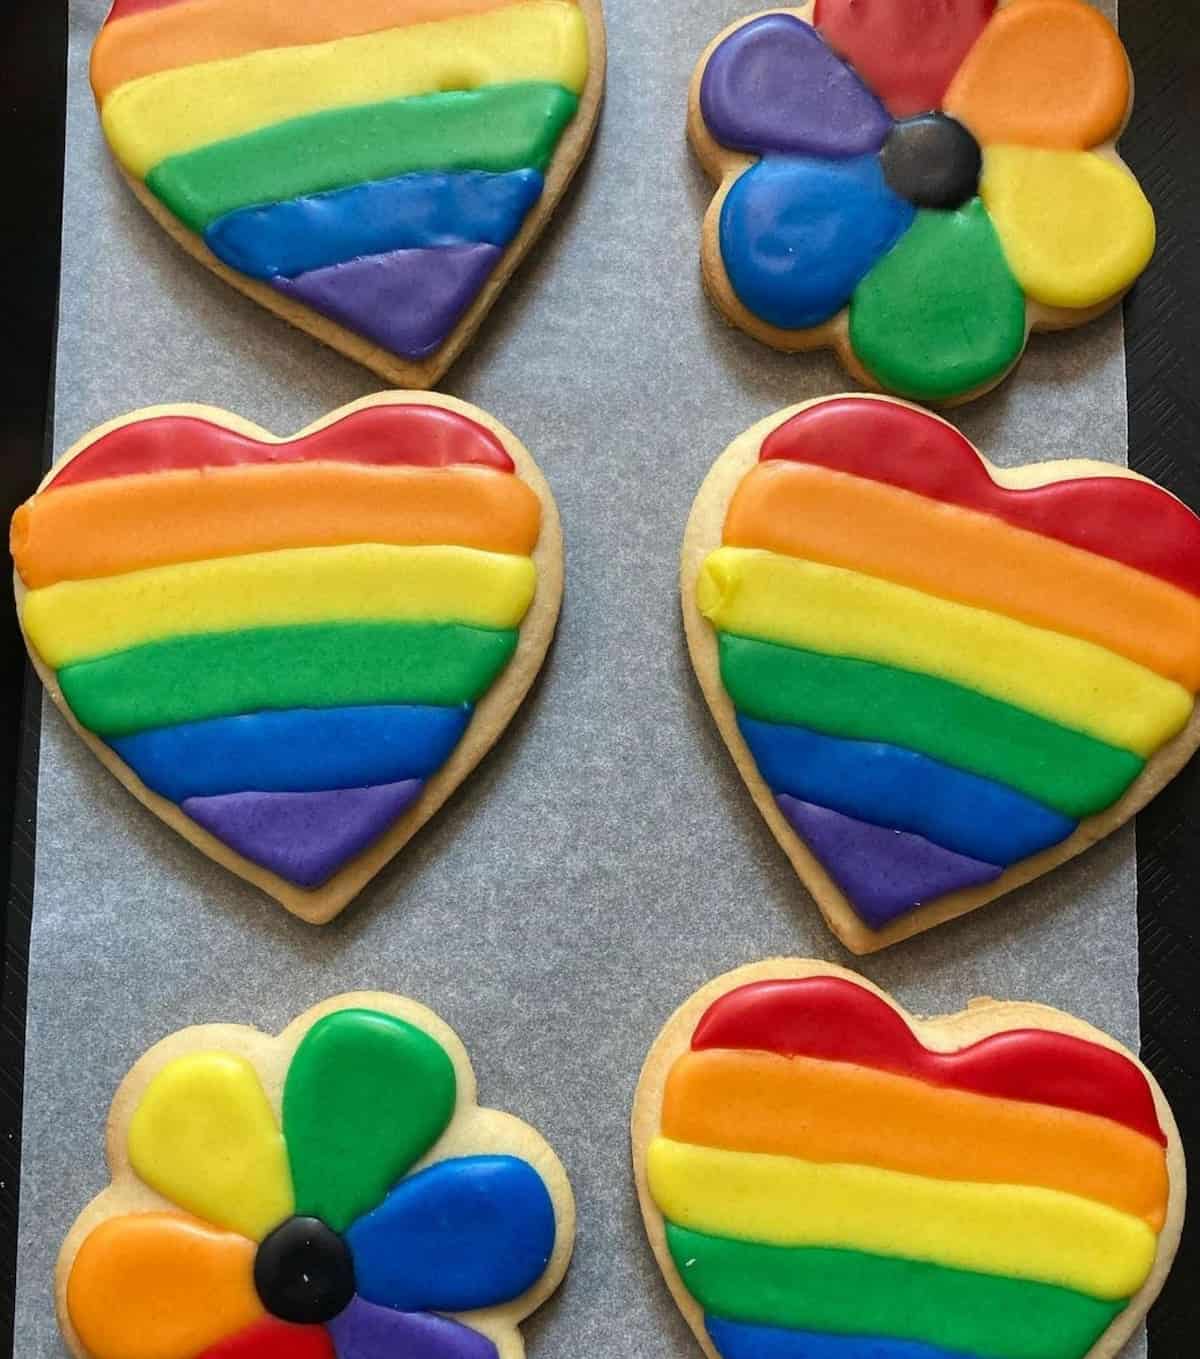 Vegan rainbow sugar cookies for pride month, made by Fat Cats Austin.